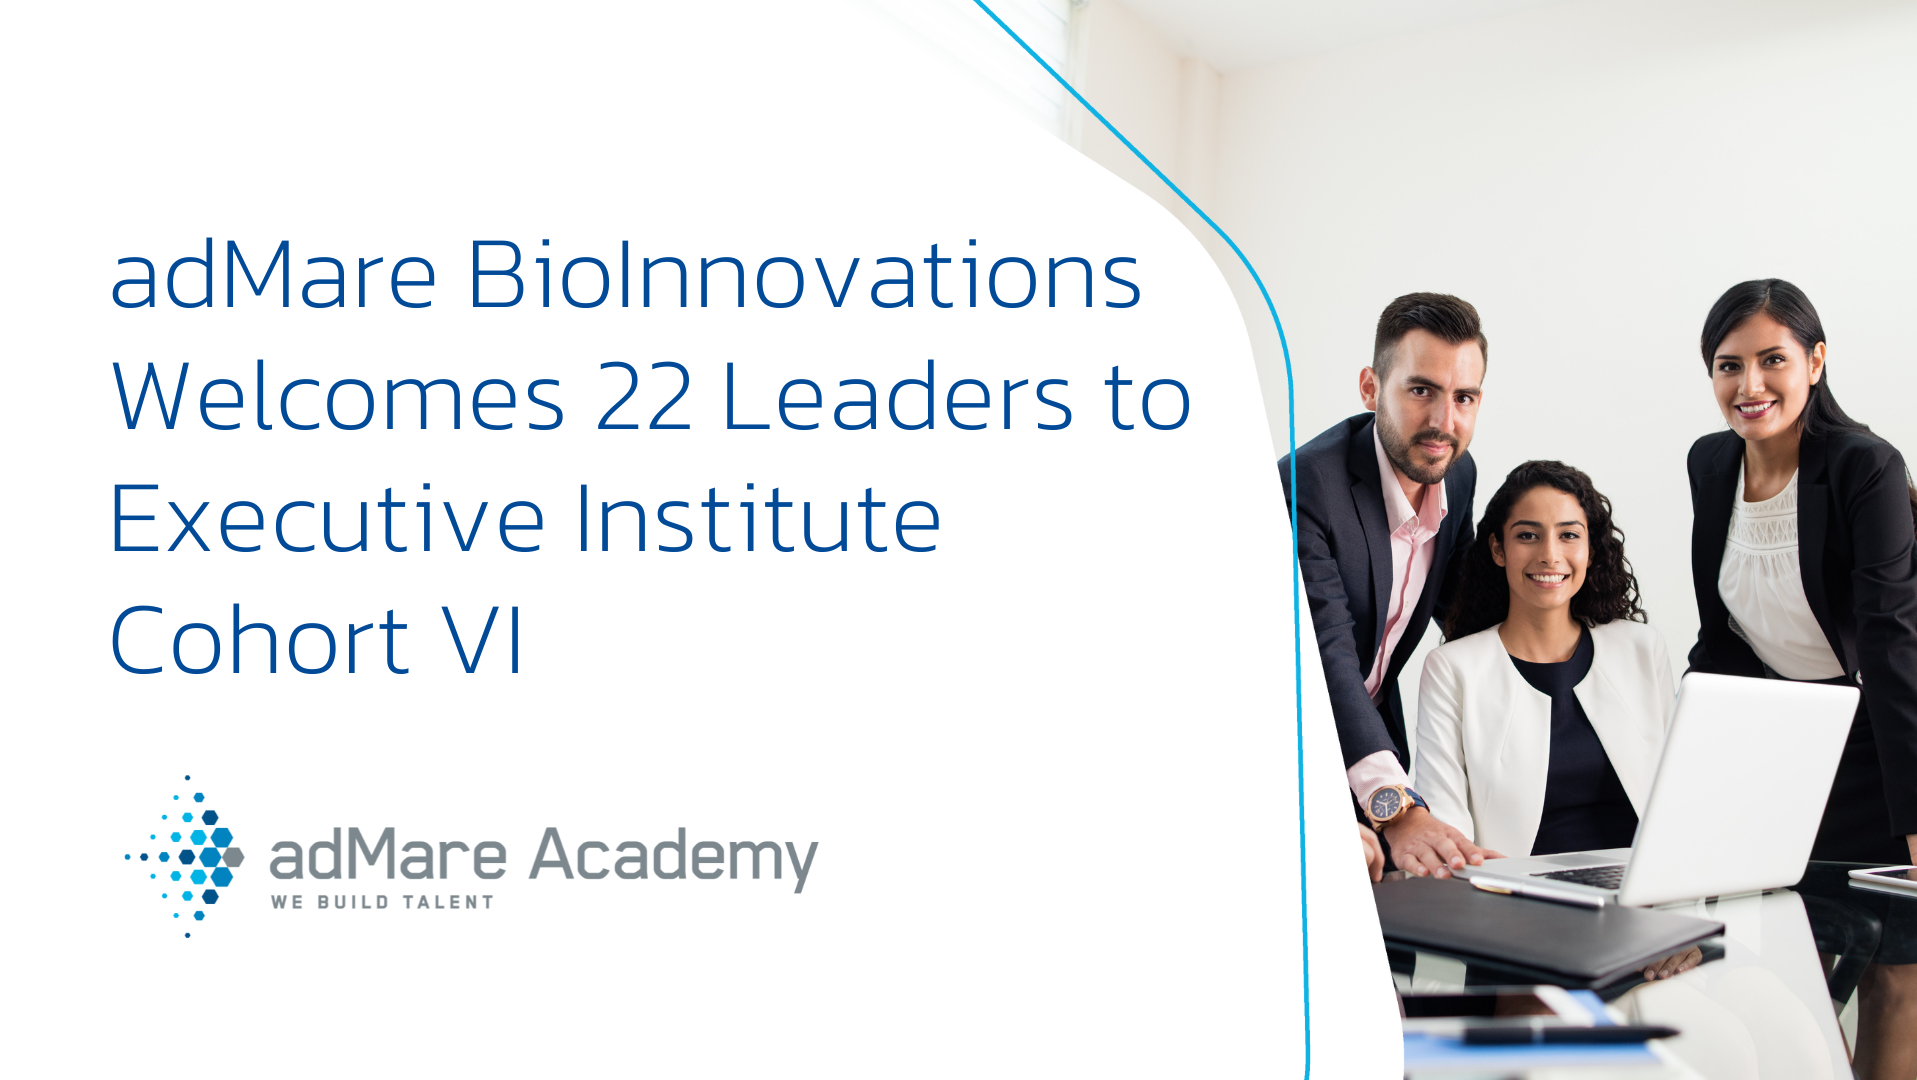 adMare BioInnovations Welcomes 22 Influential Life Sciences Leaders to Cohort VI of the adMare Academy Executive Institute